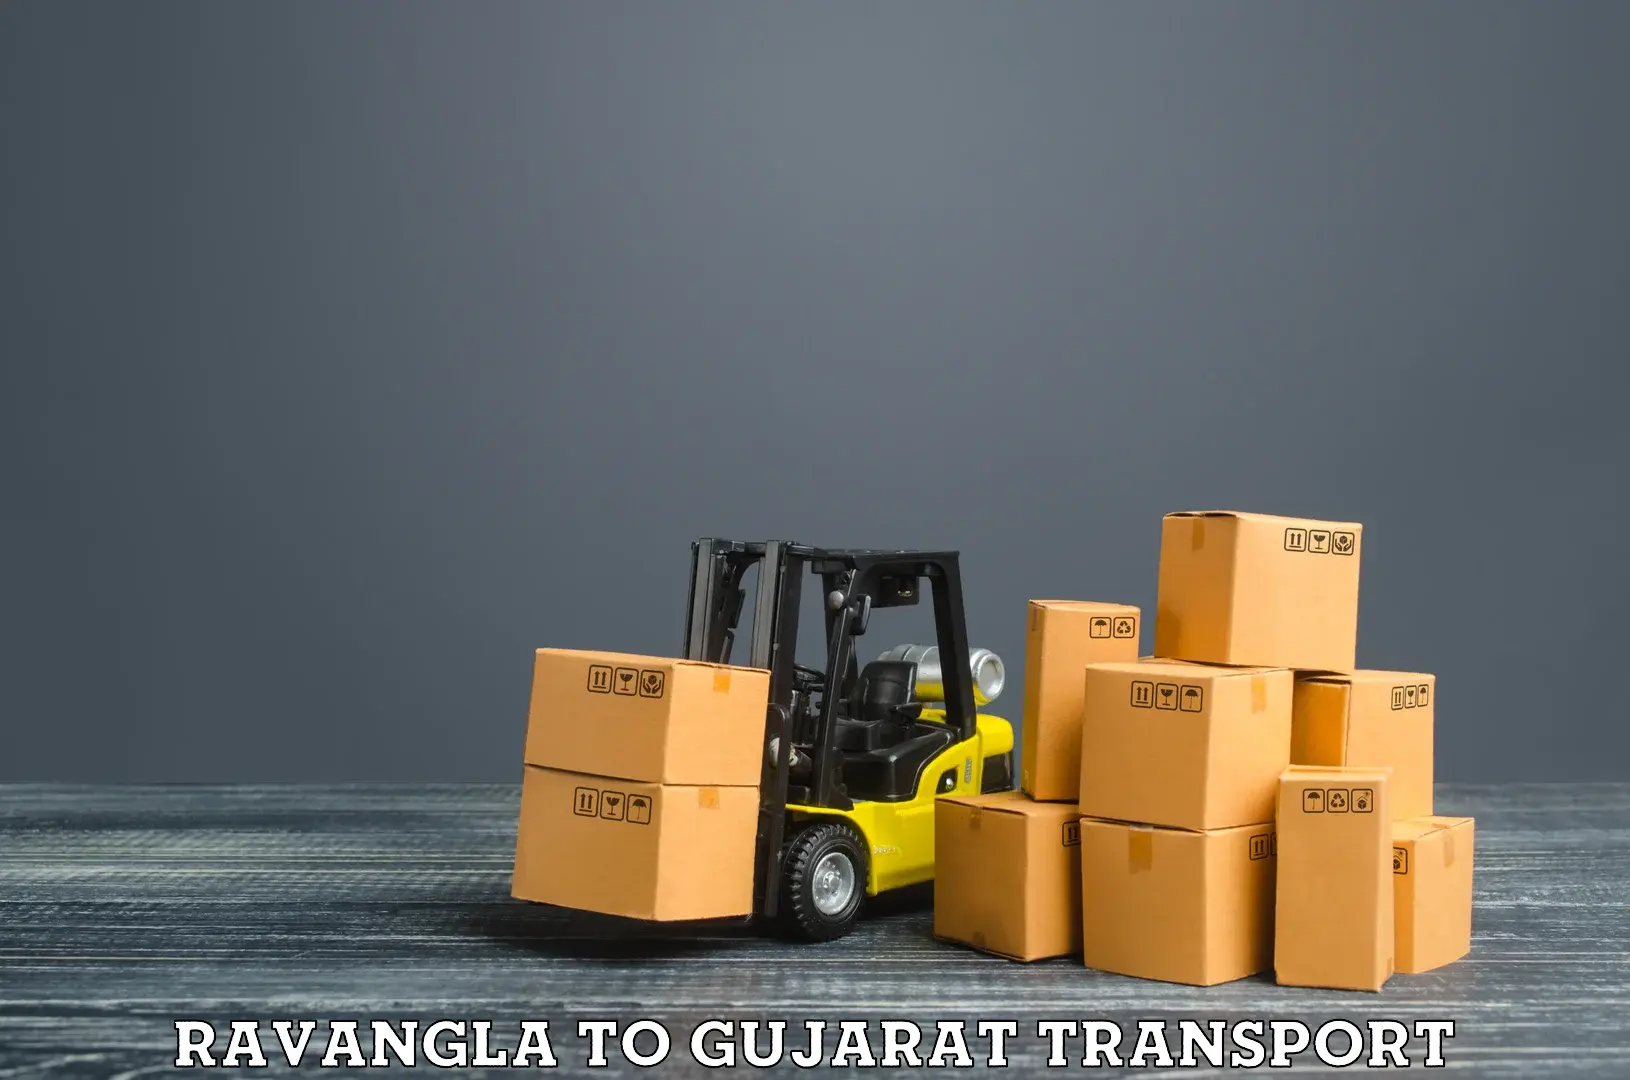 Transport bike from one state to another Ravangla to Gujarat